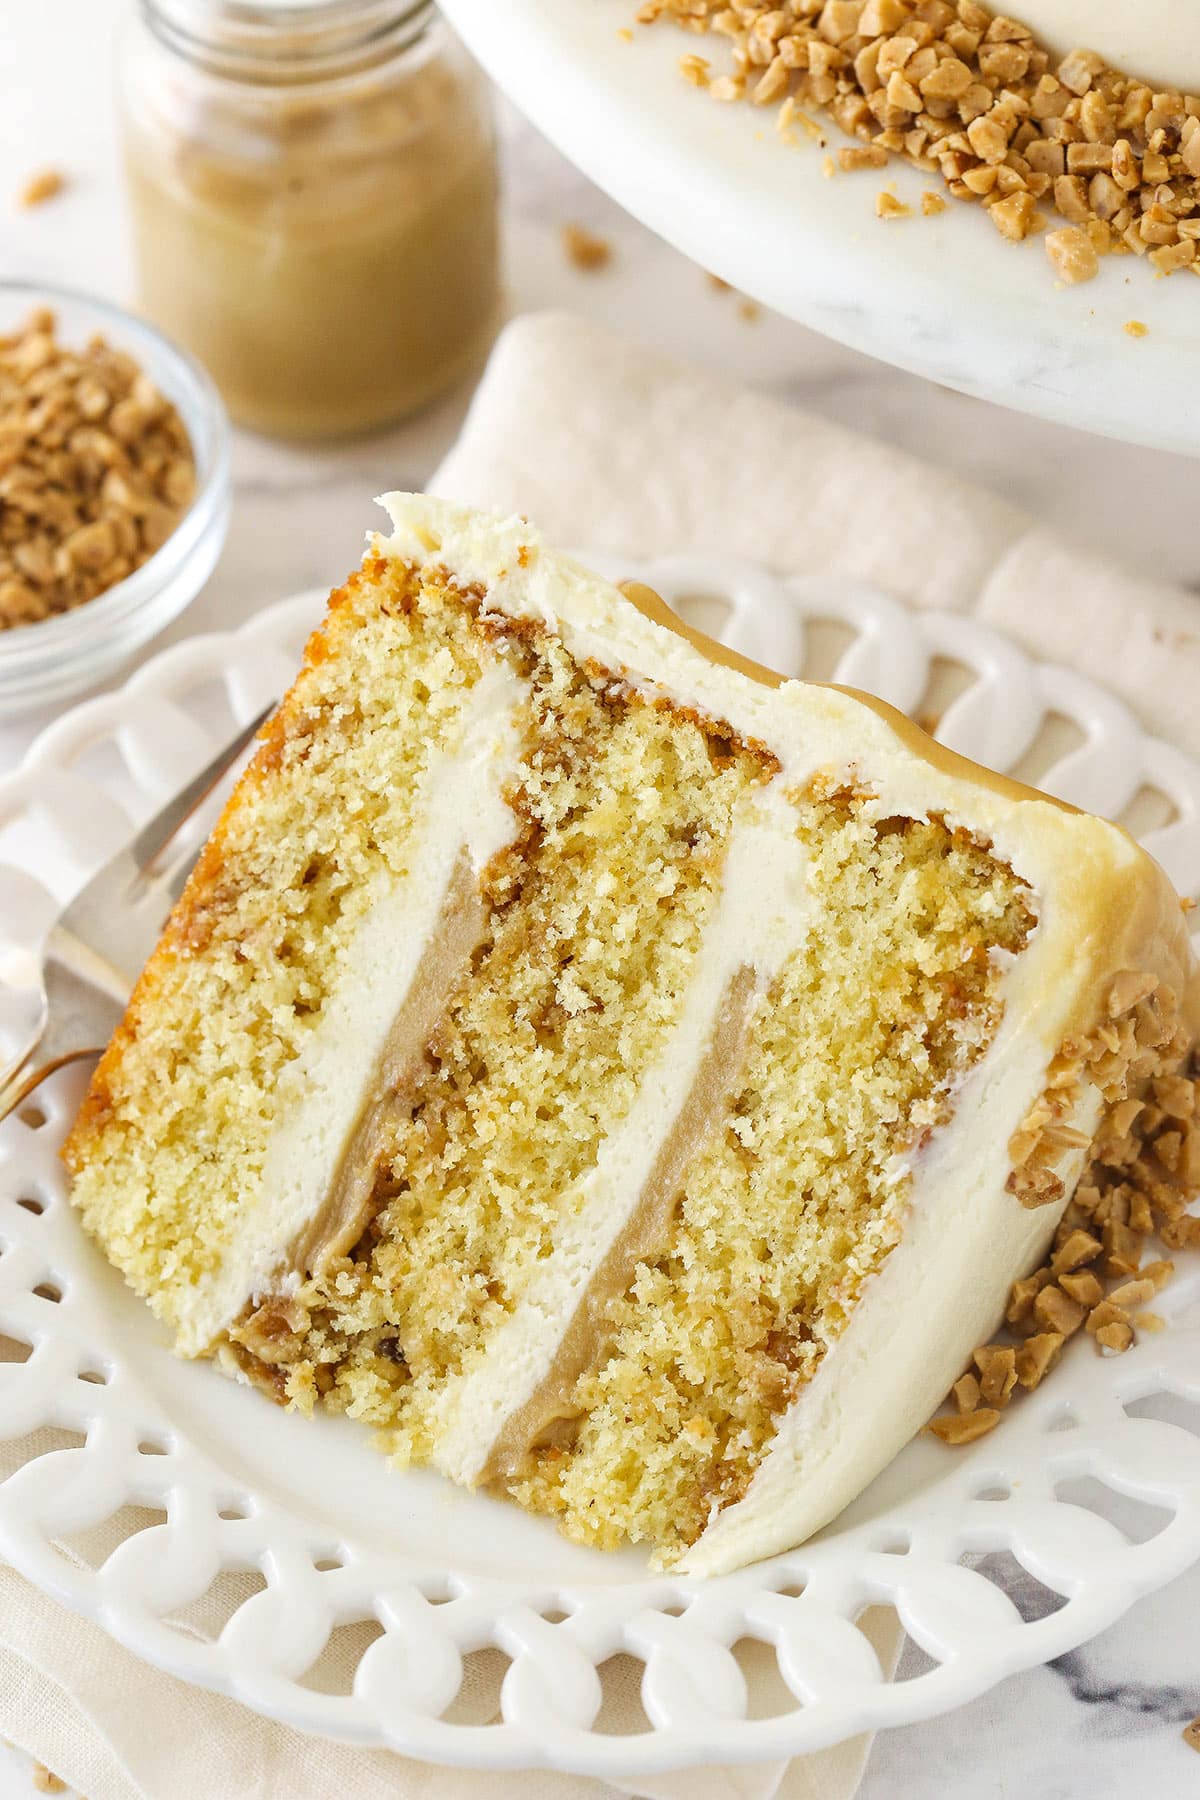 Toffee Crunch Layer Cake